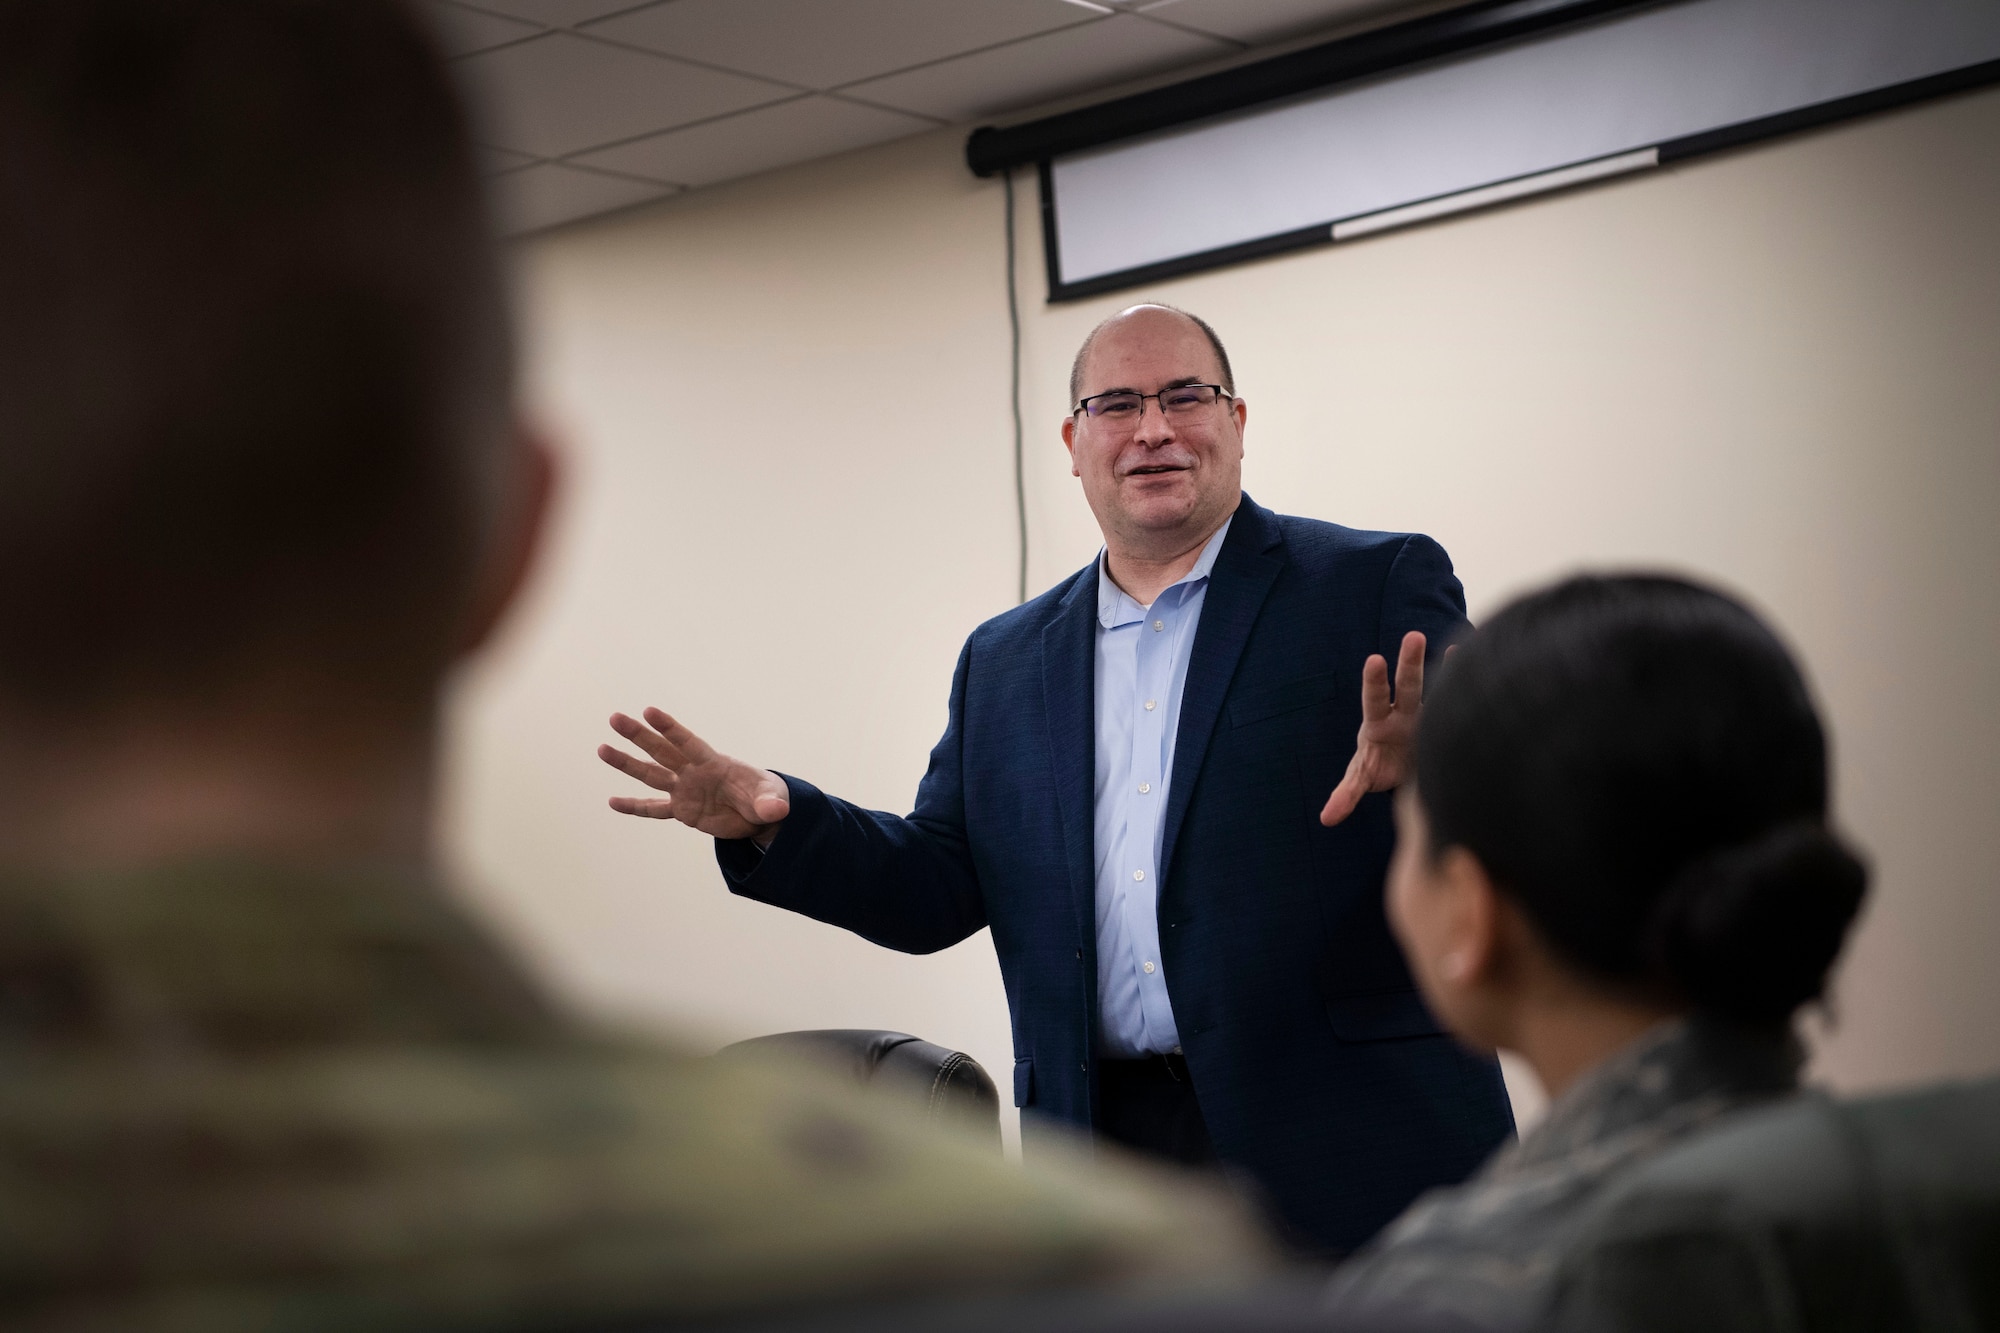 John Levitow Jr., son of Medal of Honor recipient Sgt. John Levitow, speaks to Airman Leadership School students at Hanscom Air Force Base, Mass., Jan. 31. Levitow discussed his father’s legacy and the importance of continuous education. (U.S. Air Force photo by Lauren Russell)